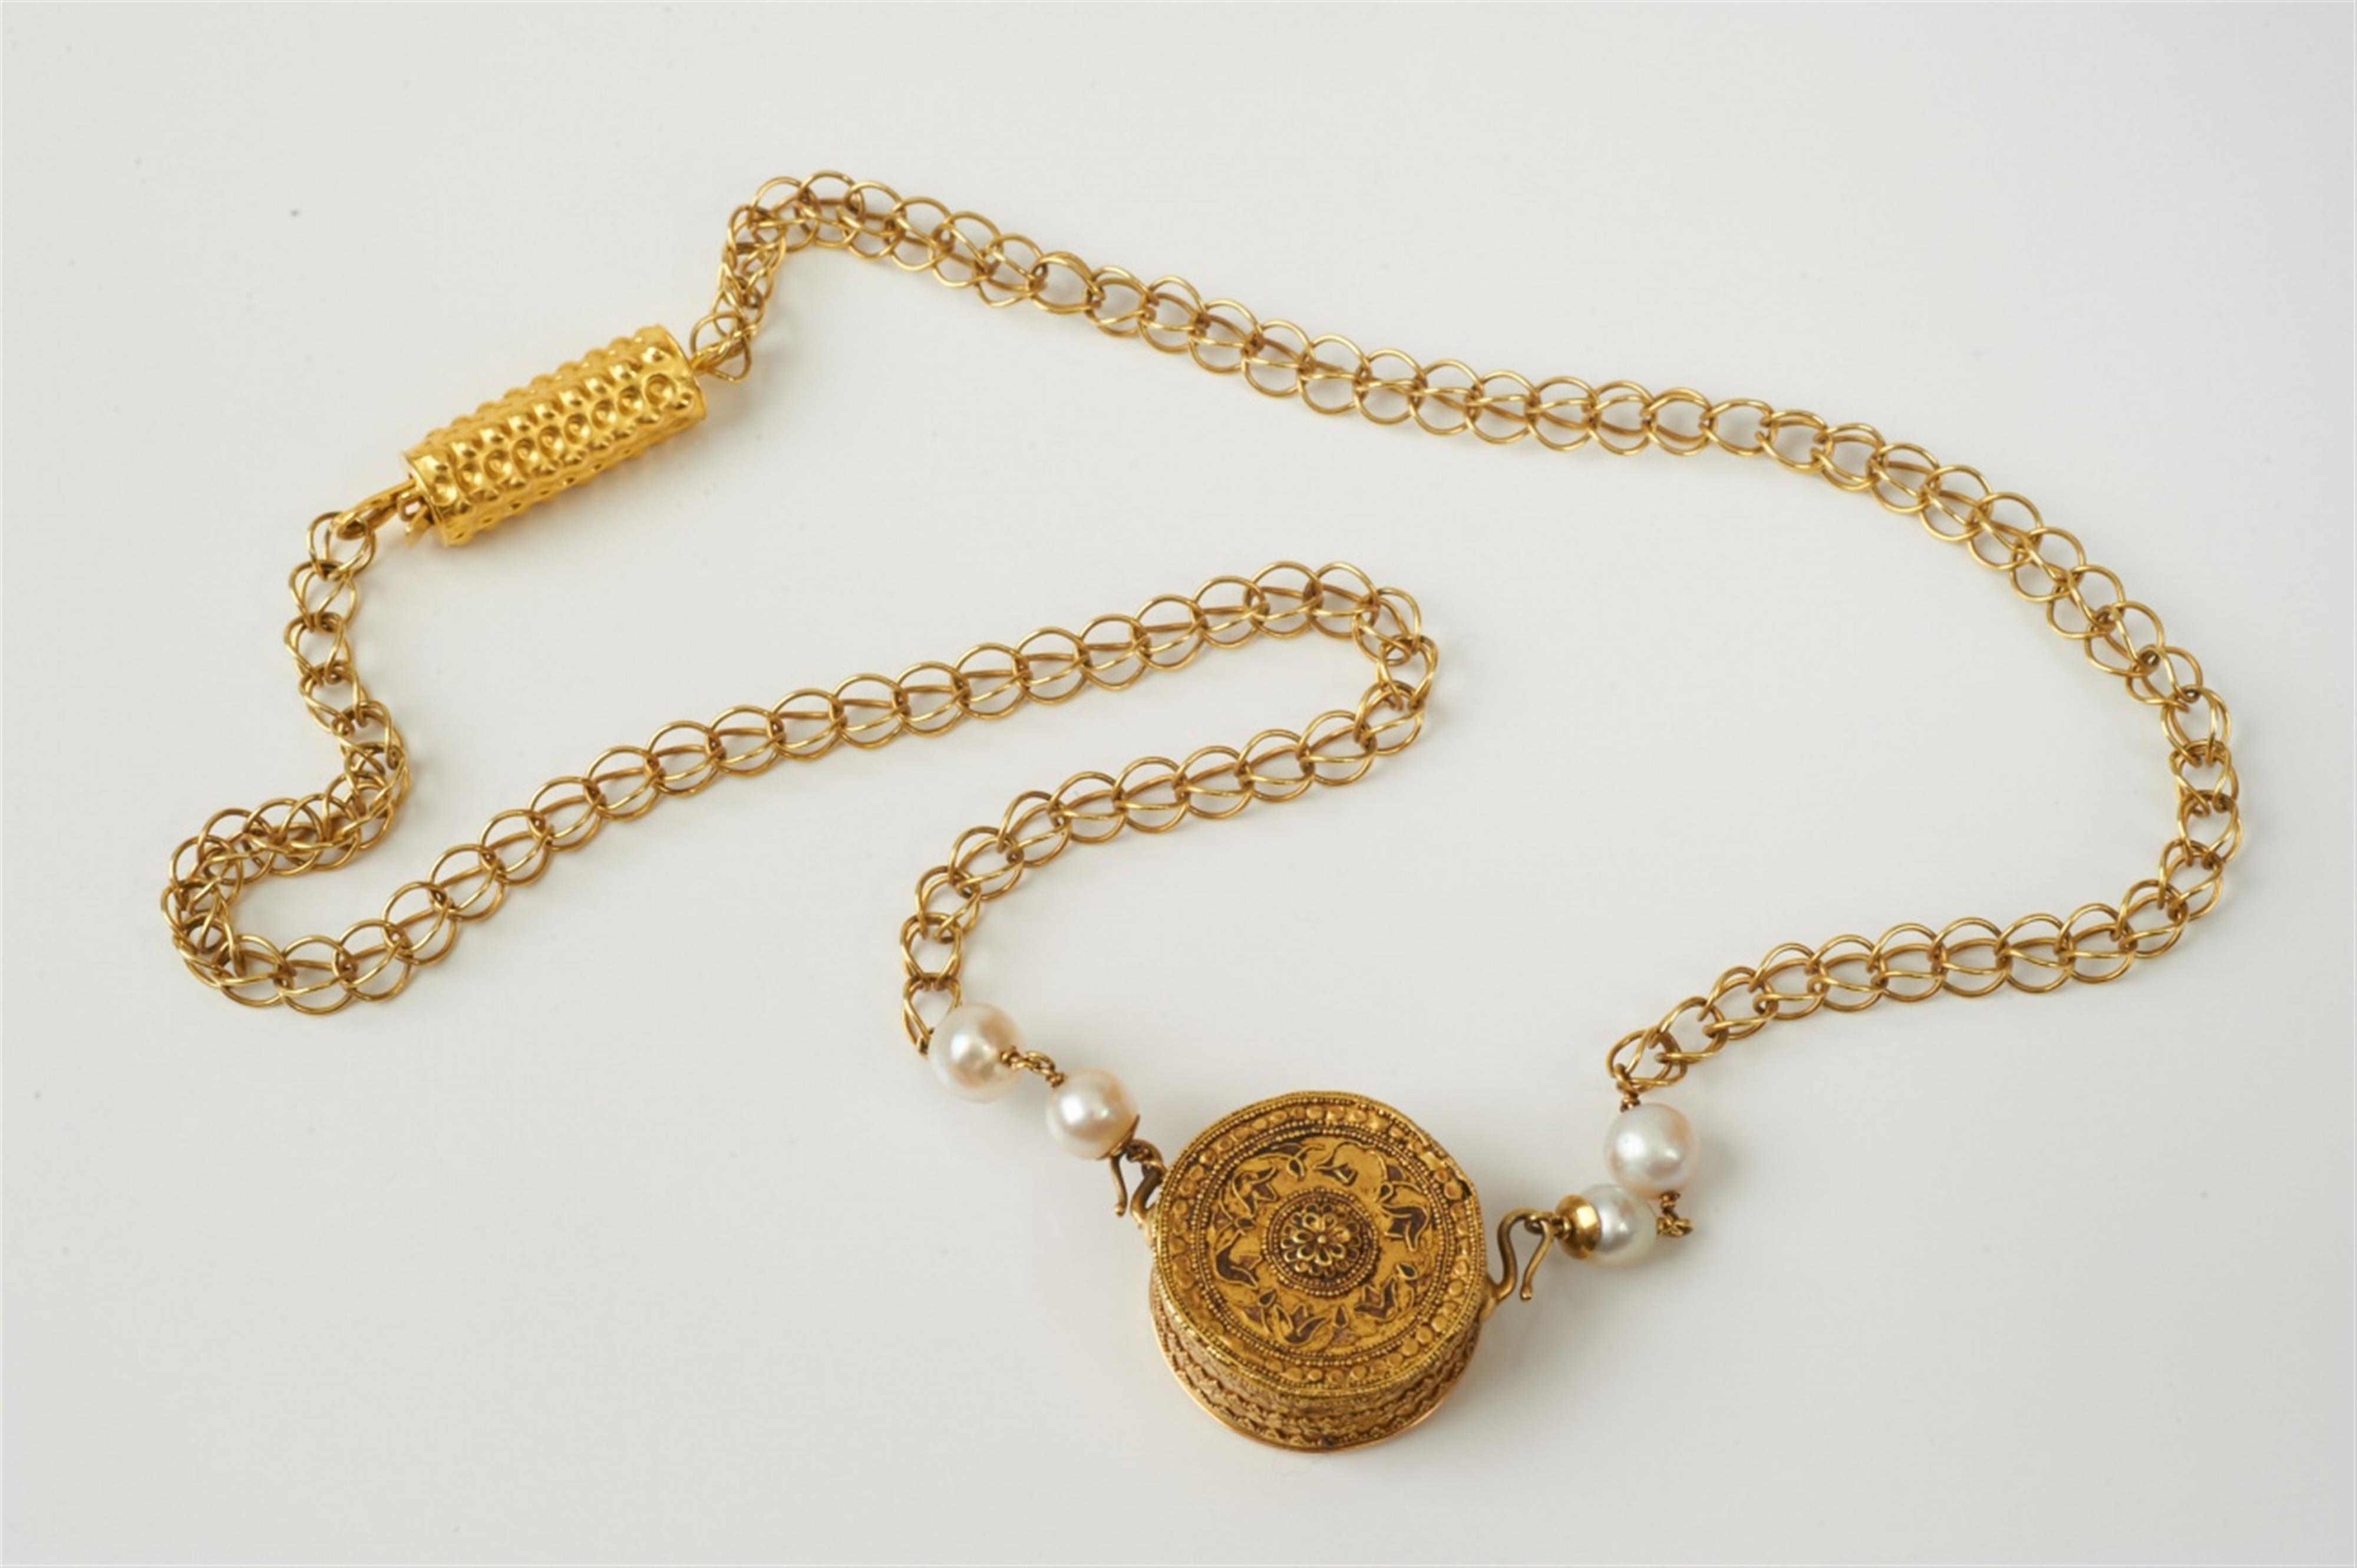 An 18k gold and pearl necklace with an Etruscan granulation pendant by Elisabeth Treskow, Cologne - image-1